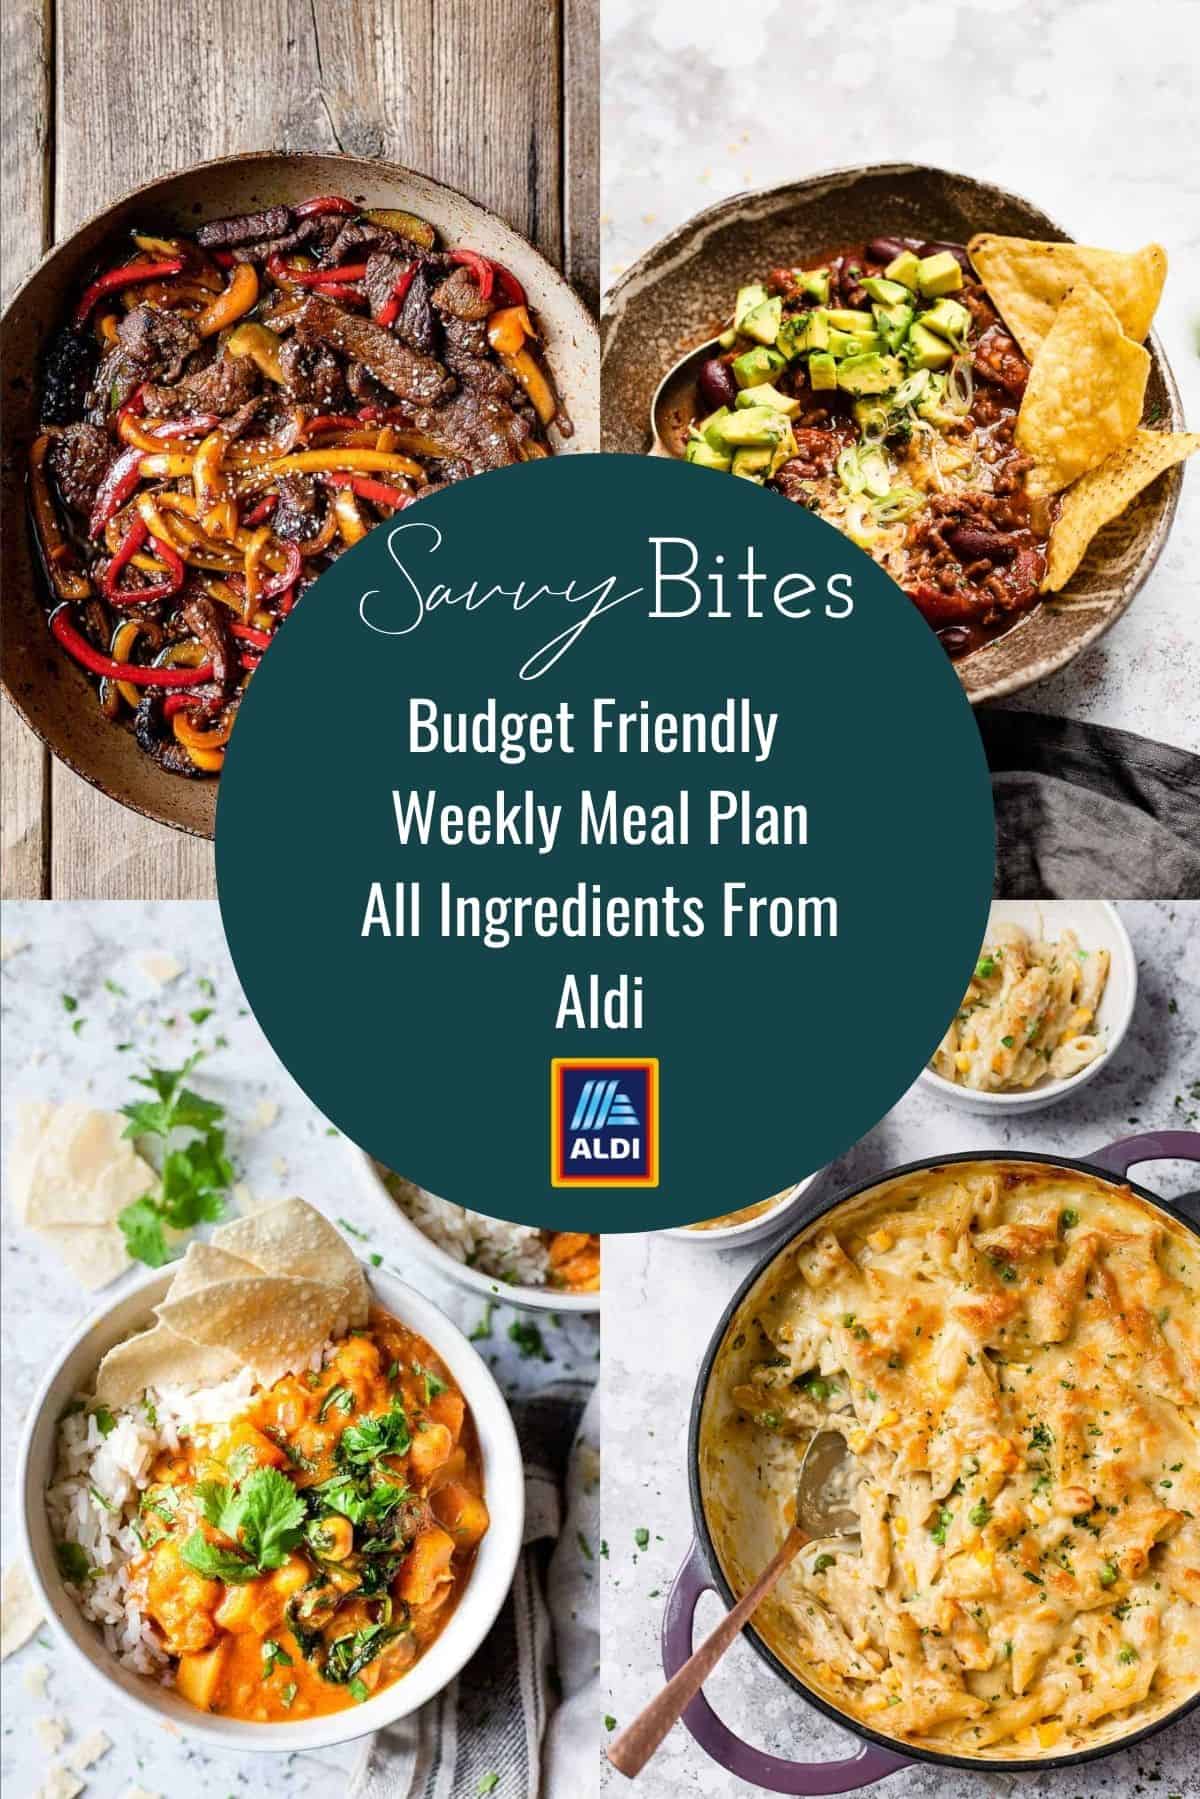 Aldi meal plan photo collage with text overlay